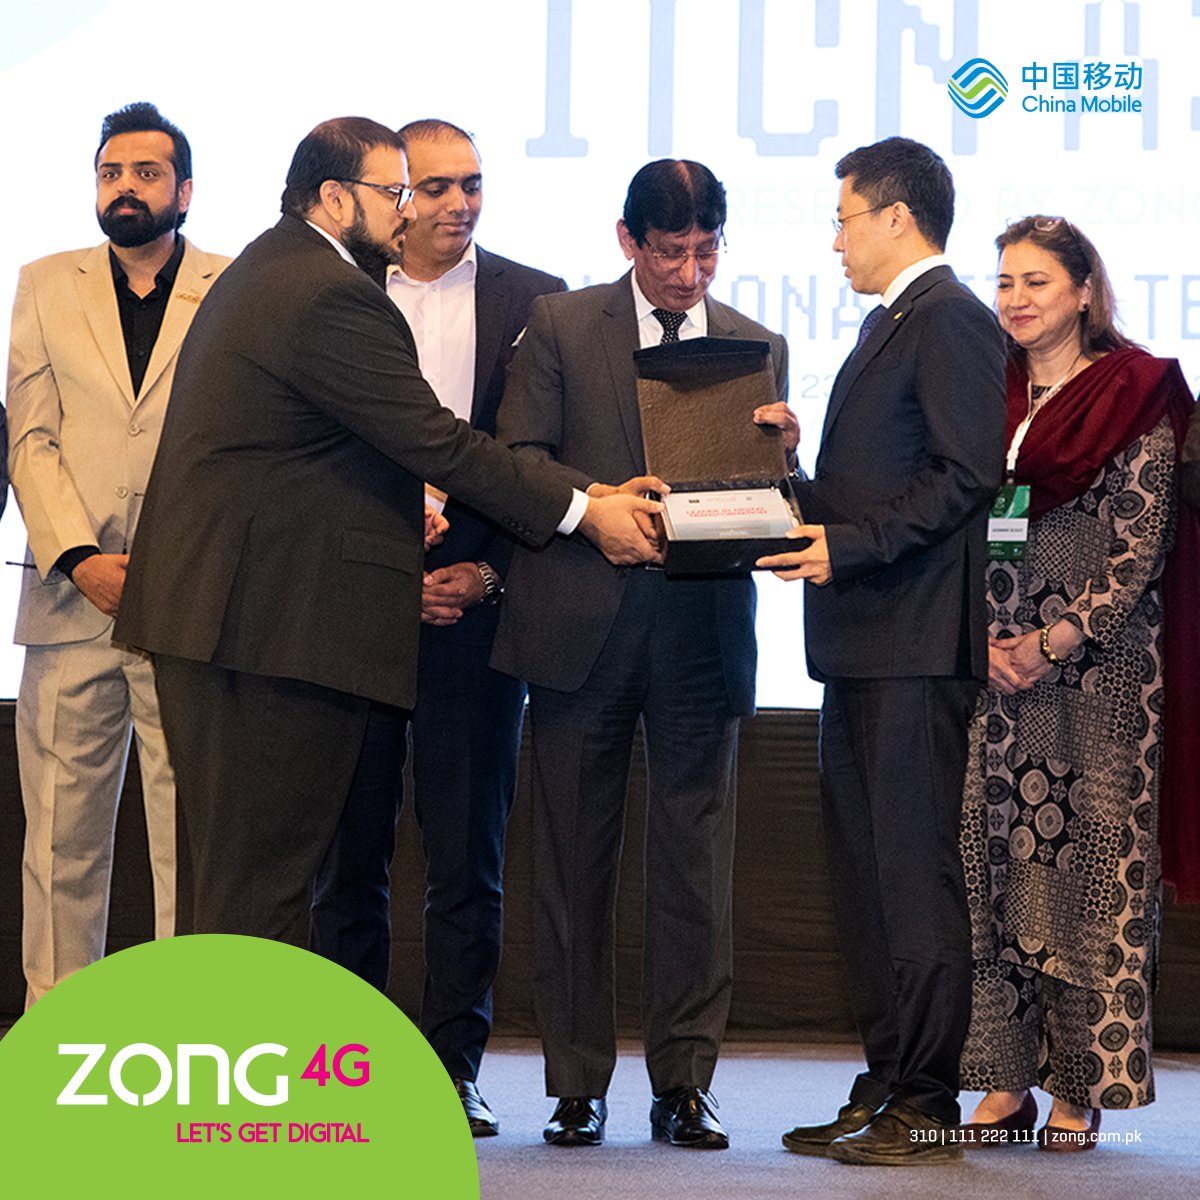 Proud to announce that Zong 4G has received the Leader in Digital Transformation Award #ITCNASIA! This recognition is a testament to our commitment to digitalizing Pakistan - Join us as we explore the latest trends & innovations in tech & #LetsGetDigital with #Zong4G 
#ZongxITCN